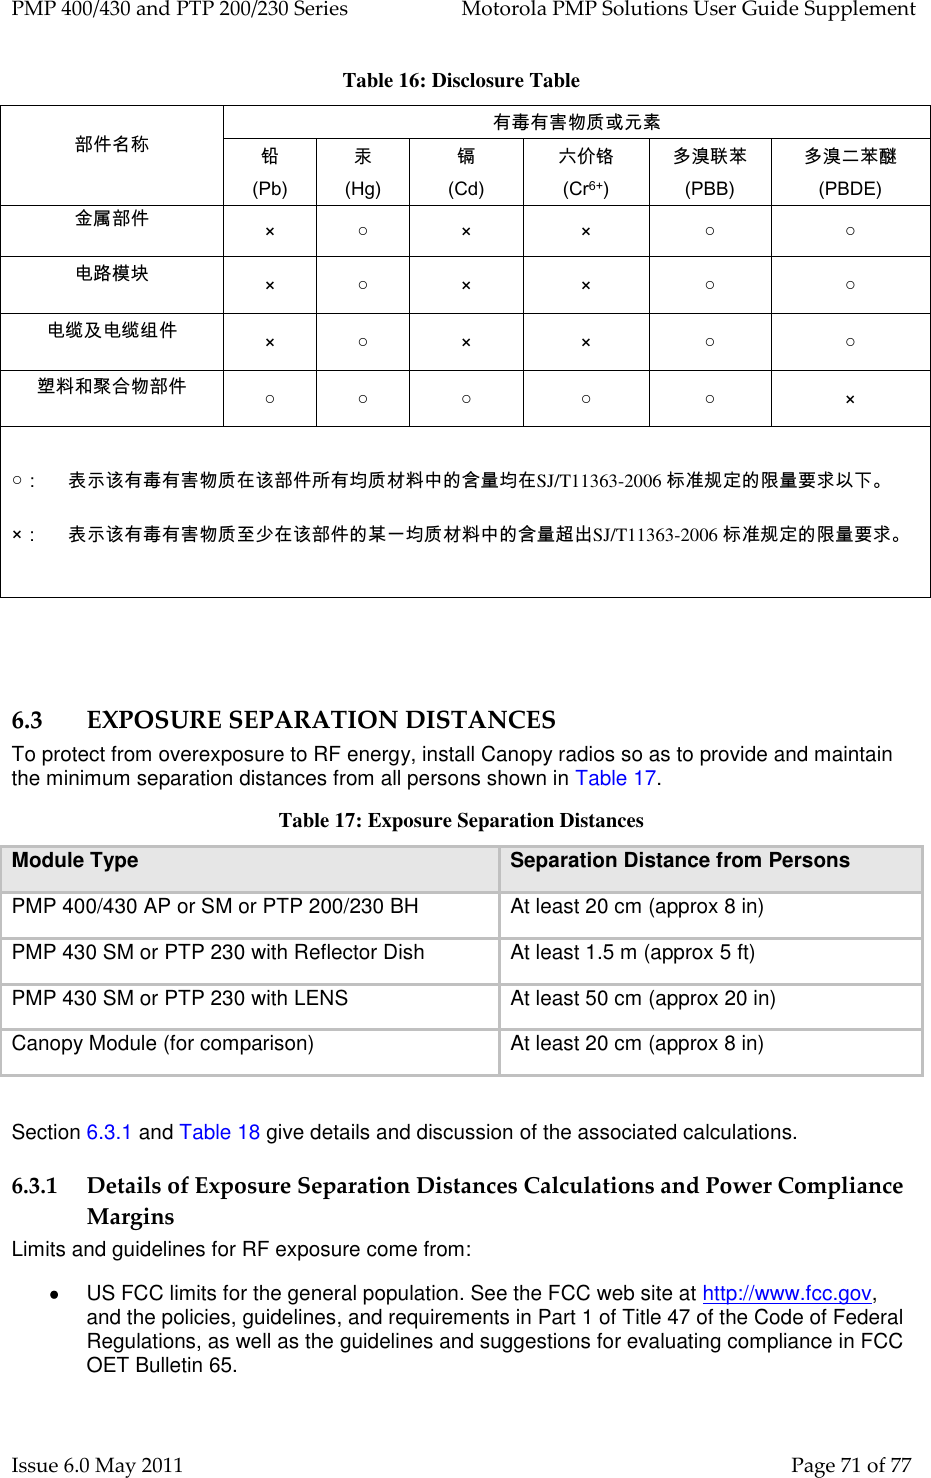 PMP 400/430 and PTP 200/230 Series   Motorola PMP Solutions User Guide Supplement Issue 6.0 May 2011    Page 71 of 77 Table 16: Disclosure Table 部件名称  有毒有害物质或元素  铅 (Pb) 汞 (Hg) 镉 (Cd) 六价铬 (Cr6+) 多溴联苯 (PBB) 多溴二苯醚 (PBDE) 金属部件  × ○ × × ○ ○ 电路模块  × ○ × × ○ ○ 电缆及电缆组件  × ○ × × ○ ○ 塑料和聚合物部件  ○ ○ ○ ○ ○ ×  ○： 表示该有毒有害物质在该部件所有均质材料中的含量均在SJ/T11363-2006 标准规定的限量要求以下。       ×： 表示该有毒有害物质至少在该部件的某一均质材料中的含量超出SJ/T11363-2006 标准规定的限量要求。      6.3 EXPOSURE SEPARATION DISTANCES To protect from overexposure to RF energy, install Canopy radios so as to provide and maintain the minimum separation distances from all persons shown in Table 17.  Table 17: Exposure Separation Distances Module Type Separation Distance from Persons PMP 400/430 AP or SM or PTP 200/230 BH At least 20 cm (approx 8 in) PMP 430 SM or PTP 230 with Reflector Dish At least 1.5 m (approx 5 ft) PMP 430 SM or PTP 230 with LENS At least 50 cm (approx 20 in) Canopy Module (for comparison) At least 20 cm (approx 8 in)  Section 6.3.1 and Table 18 give details and discussion of the associated calculations. 6.3.1 Details of Exposure Separation Distances Calculations and Power Compliance Margins Limits and guidelines for RF exposure come from:   US FCC limits for the general population. See the FCC web site at http://www.fcc.gov, and the policies, guidelines, and requirements in Part 1 of Title 47 of the Code of Federal Regulations, as well as the guidelines and suggestions for evaluating compliance in FCC OET Bulletin 65.  